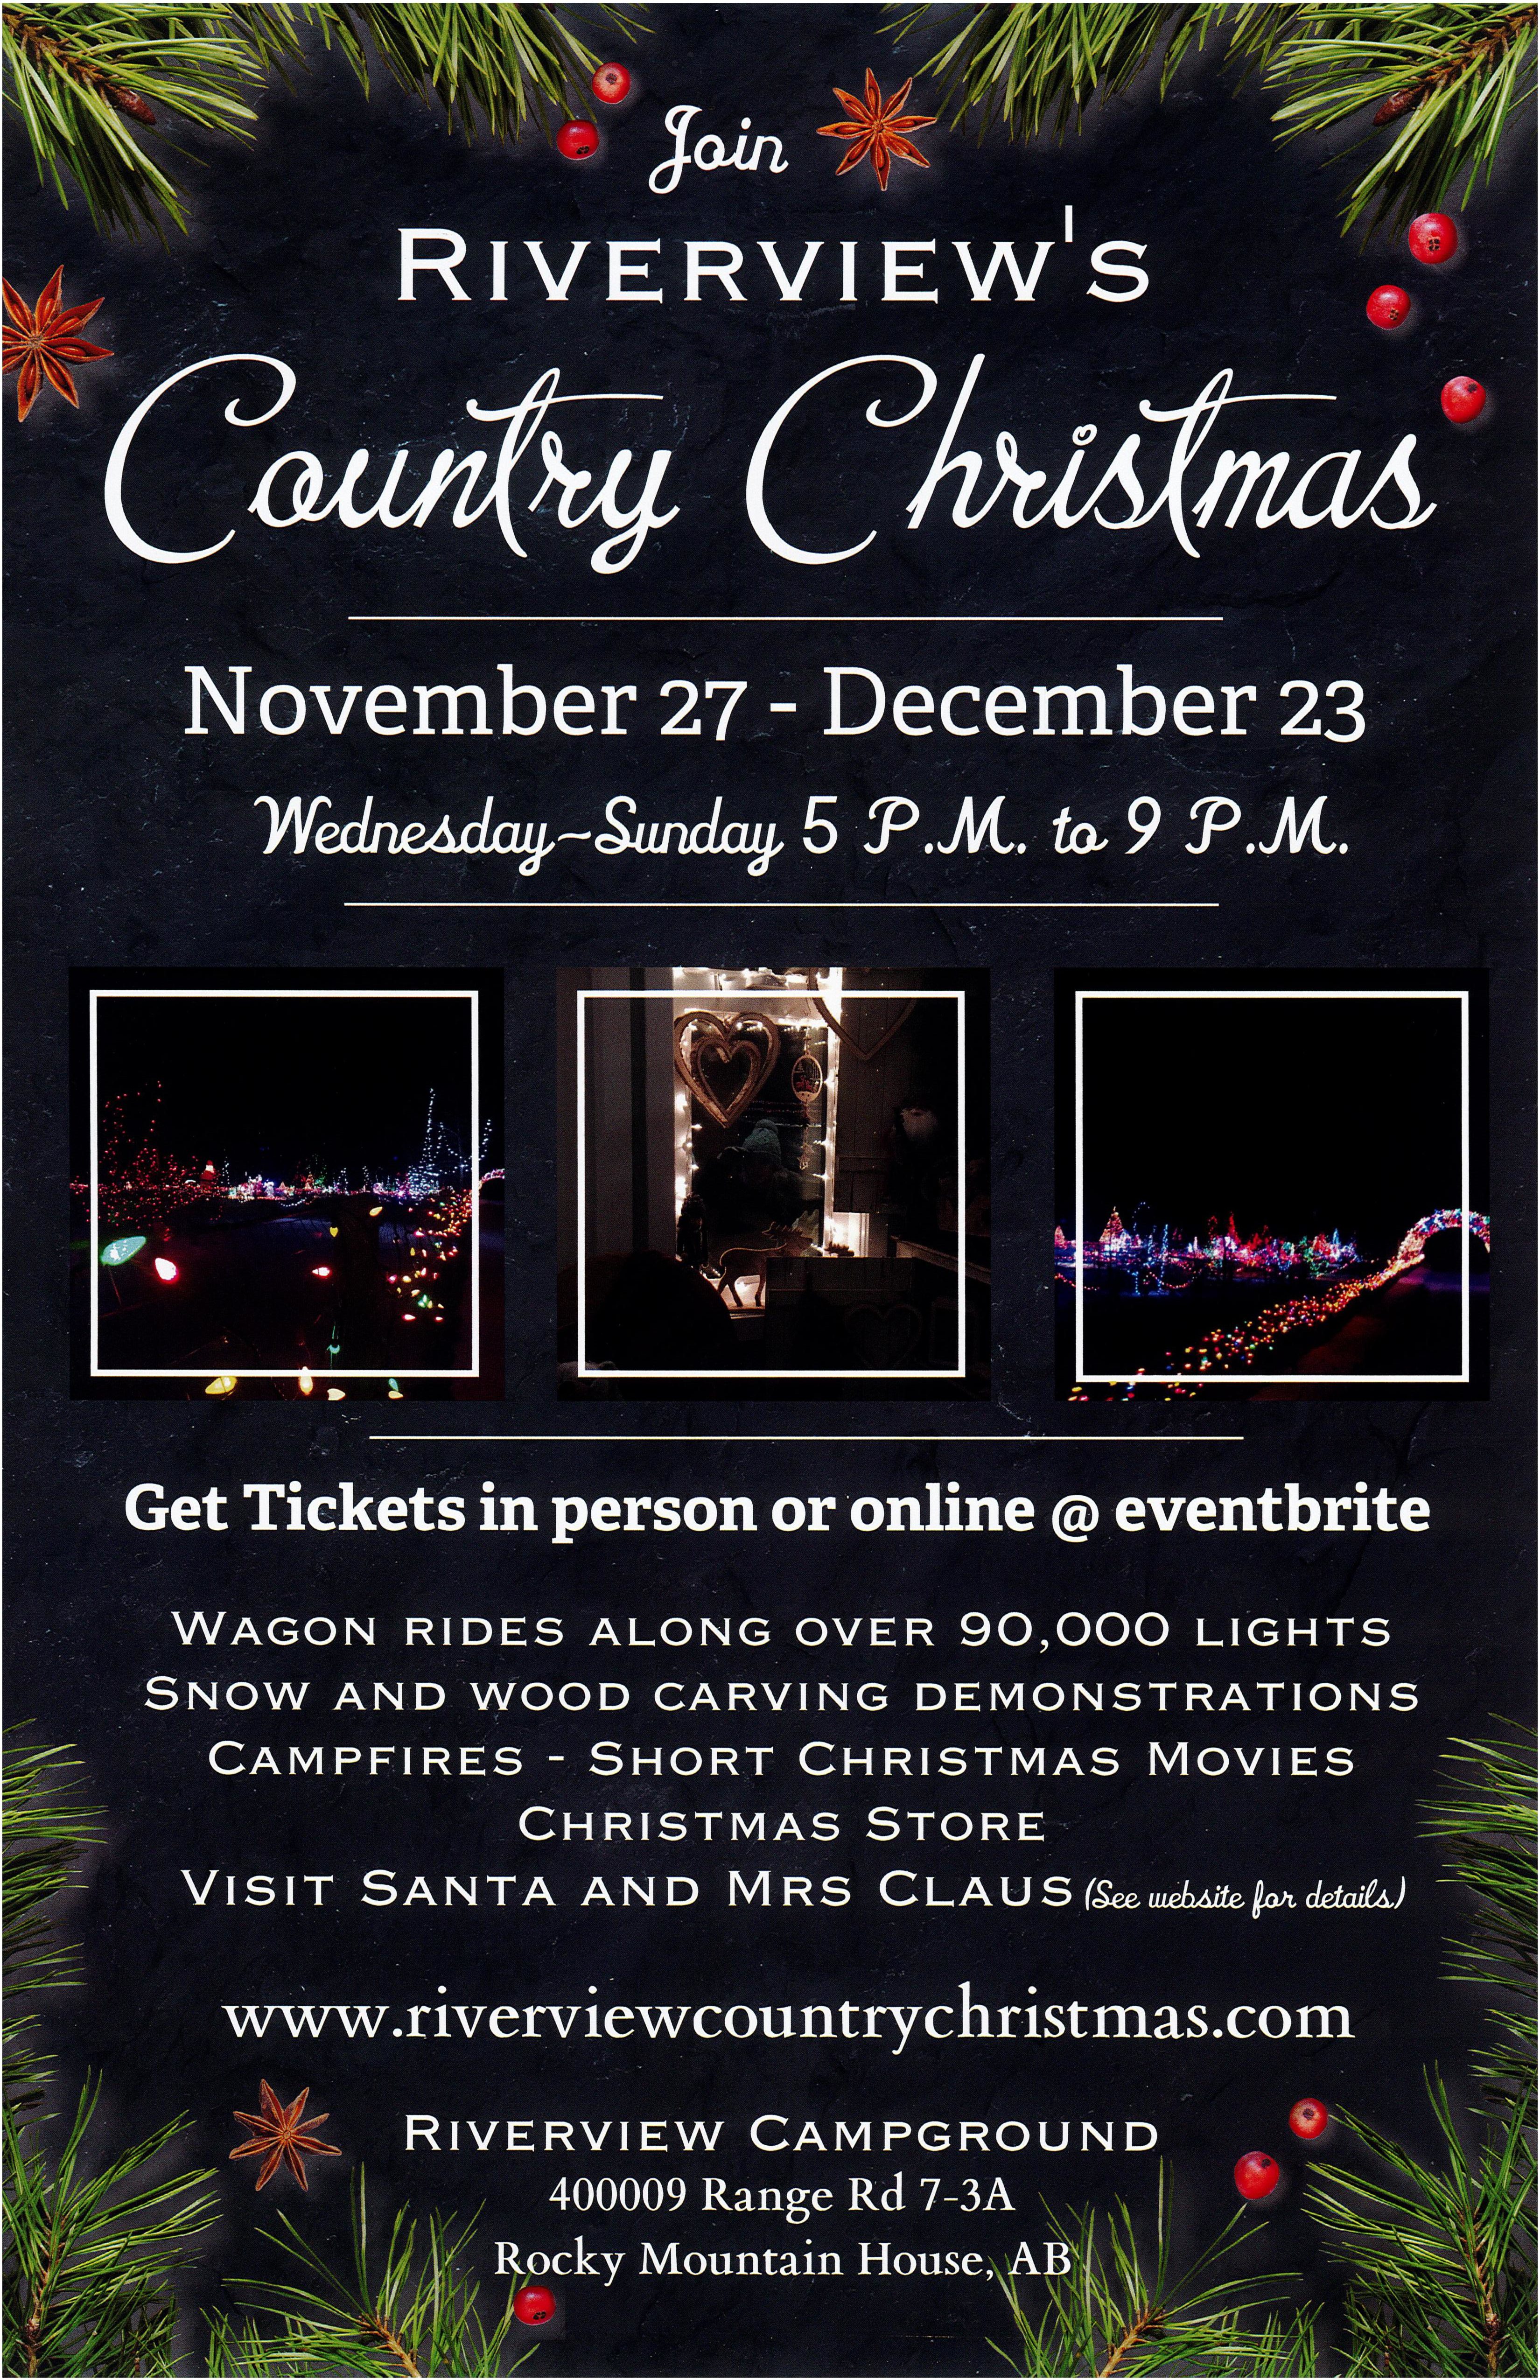 Riverview's Country Christmas 2019